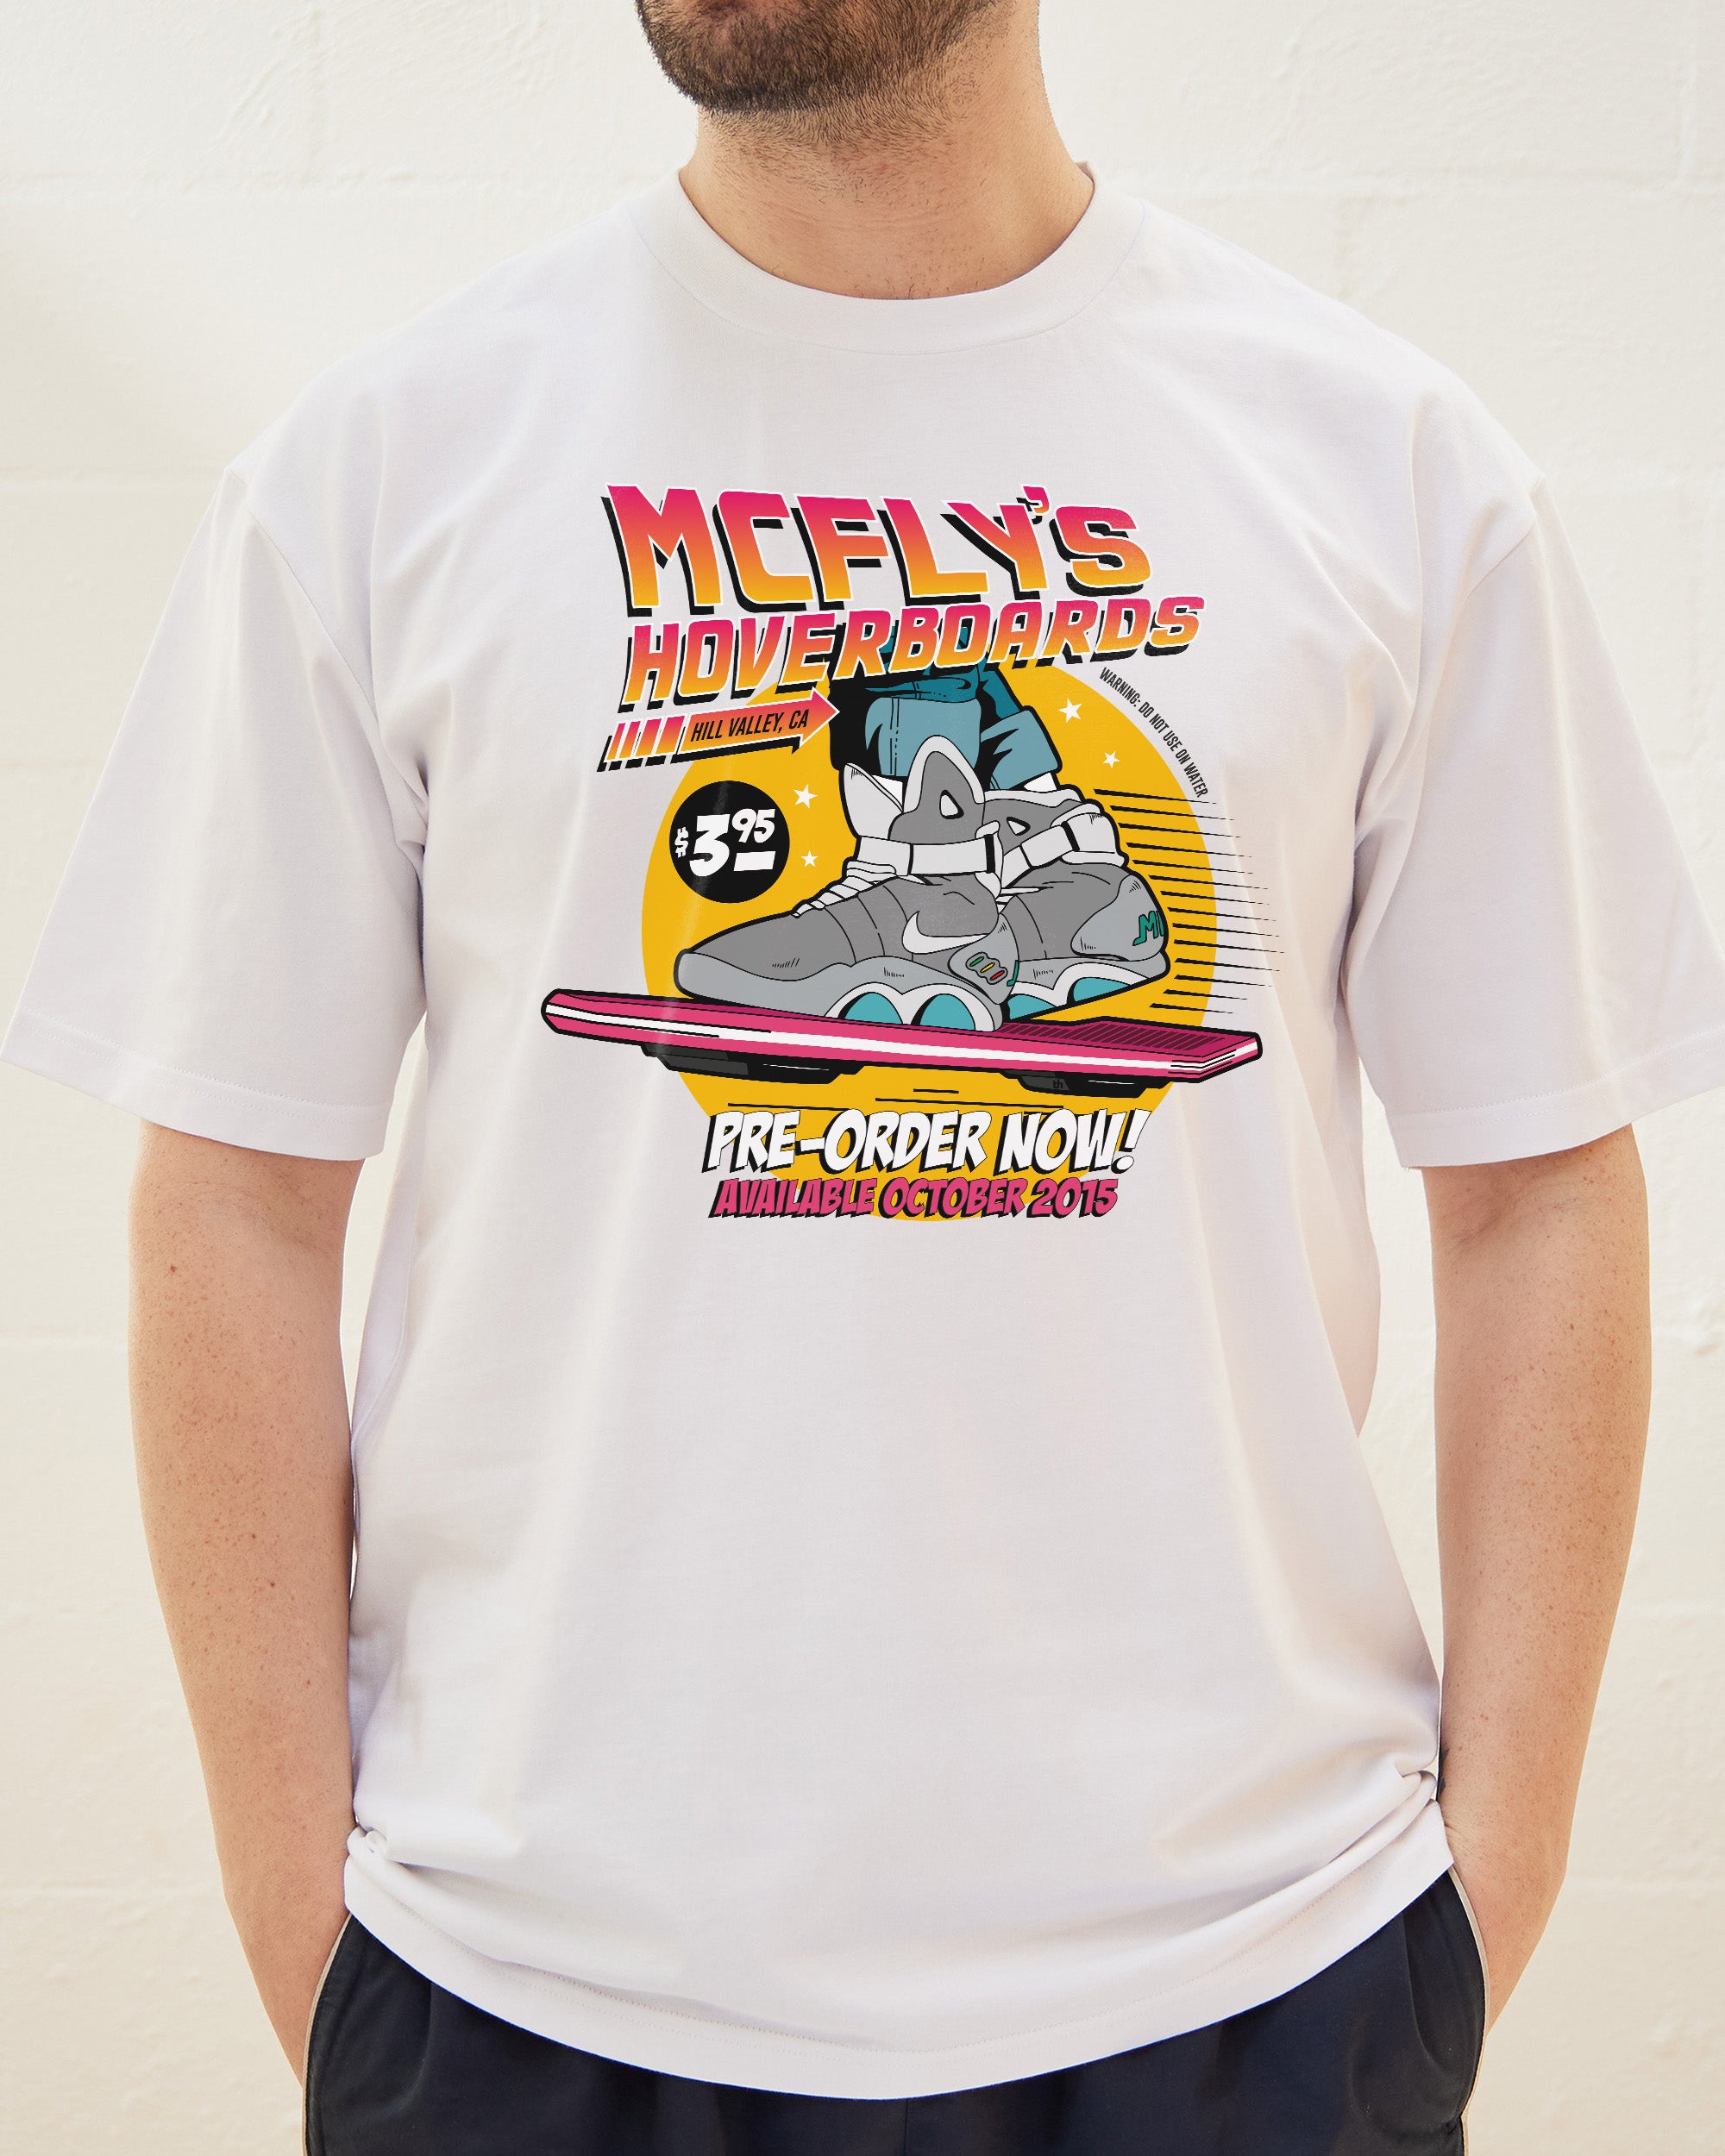 McFly's Hoverboards T-Shirt